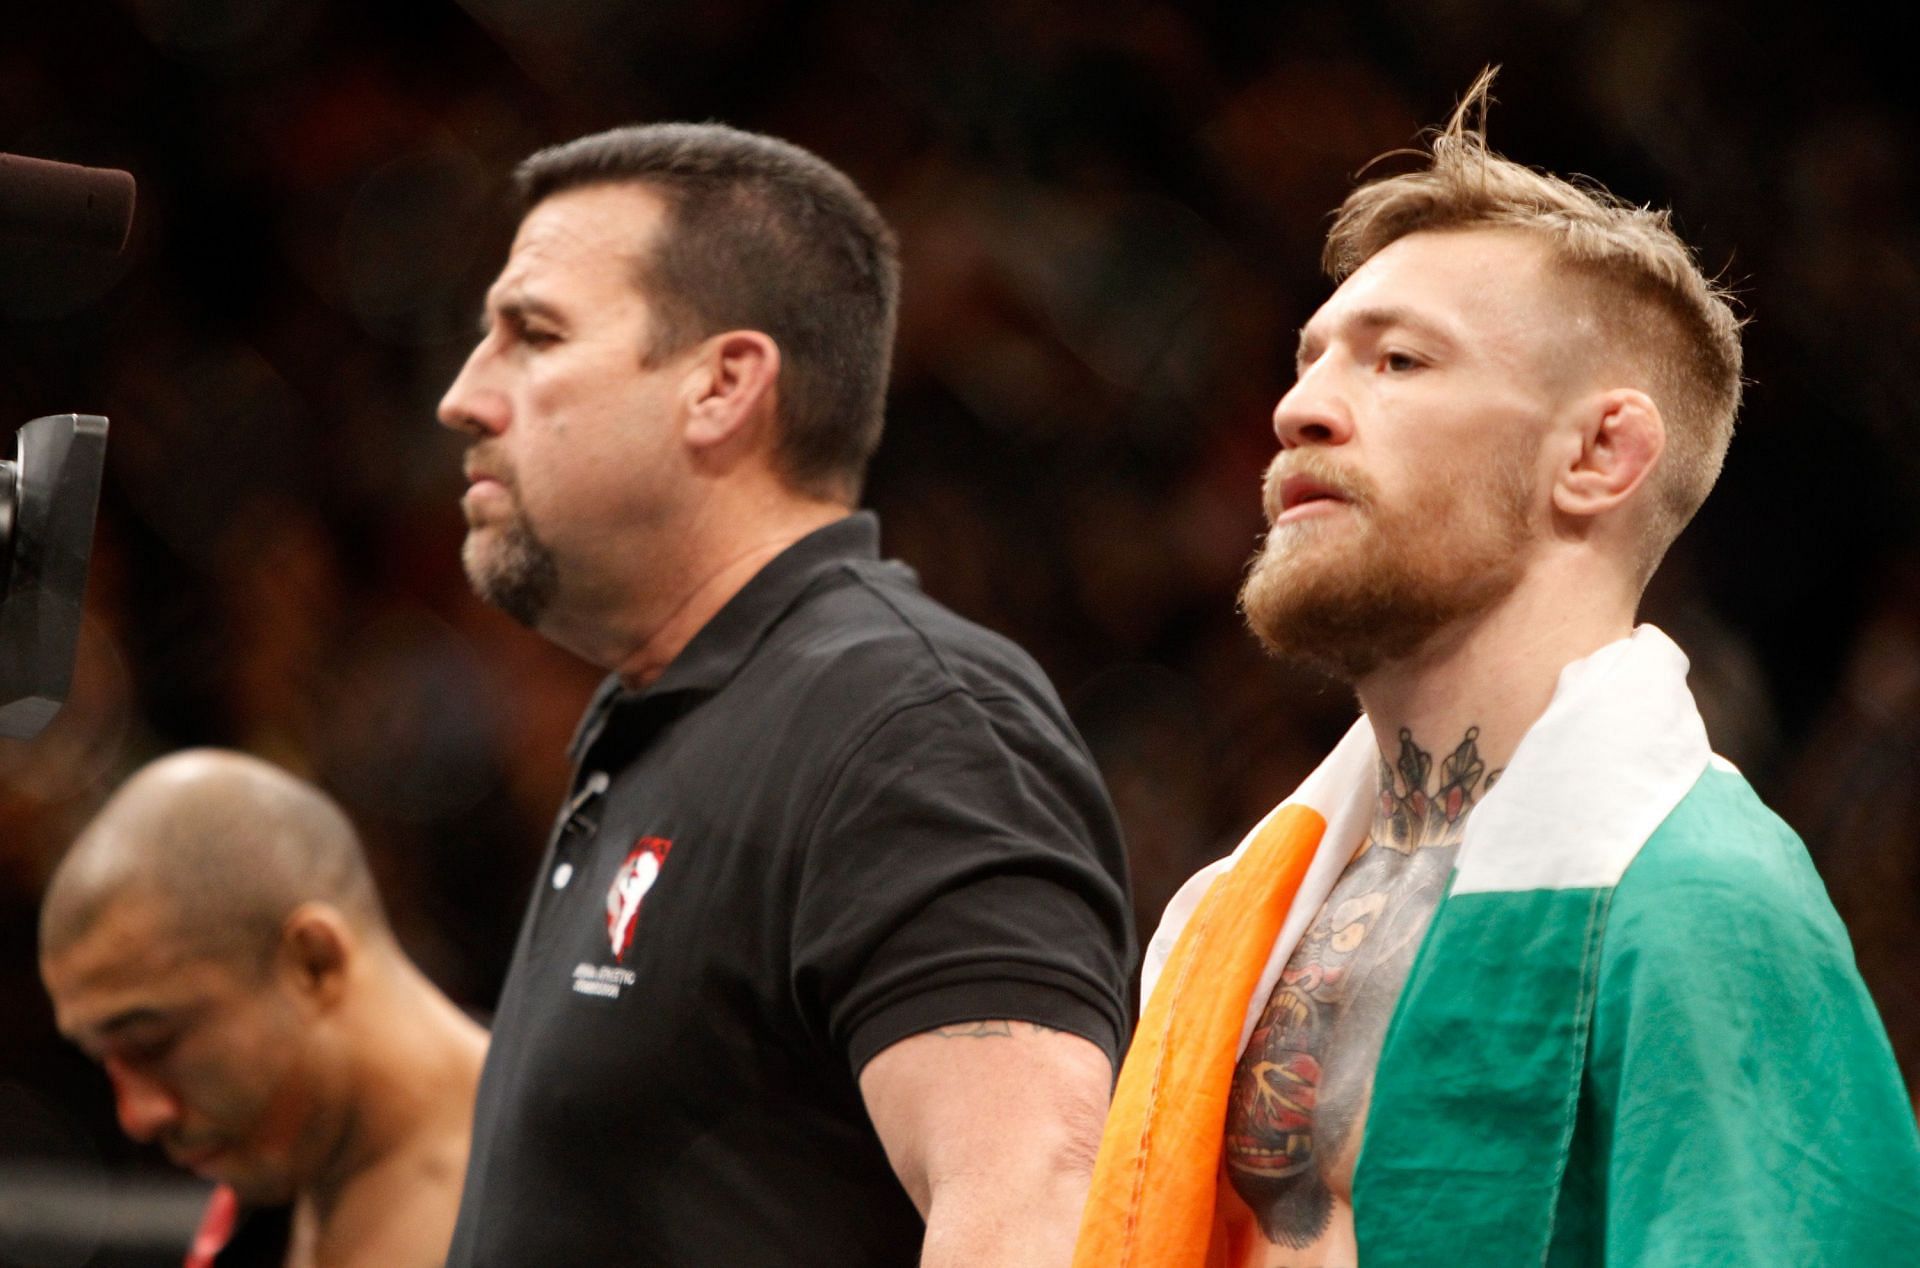 Conor McGregor knocked out Jose Aldo in 2015 but has been respectful to him since